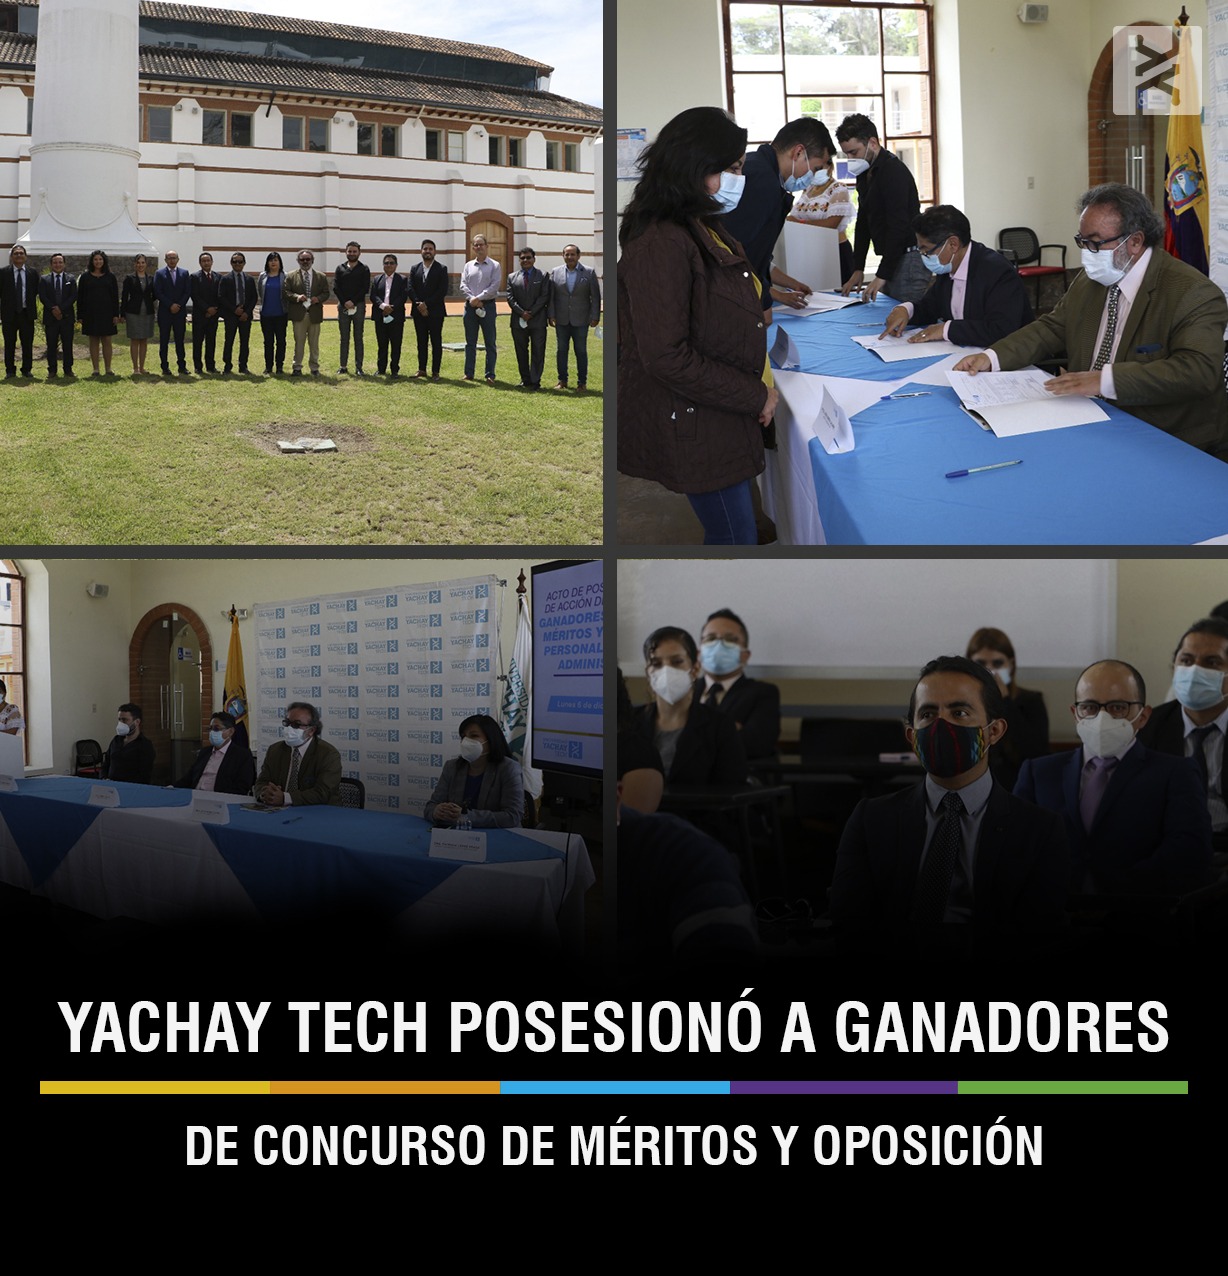 WINNERS OF THE MERIT AND OPPOSITION CONTEST AT YACHAY TECH TAKE OFFICE